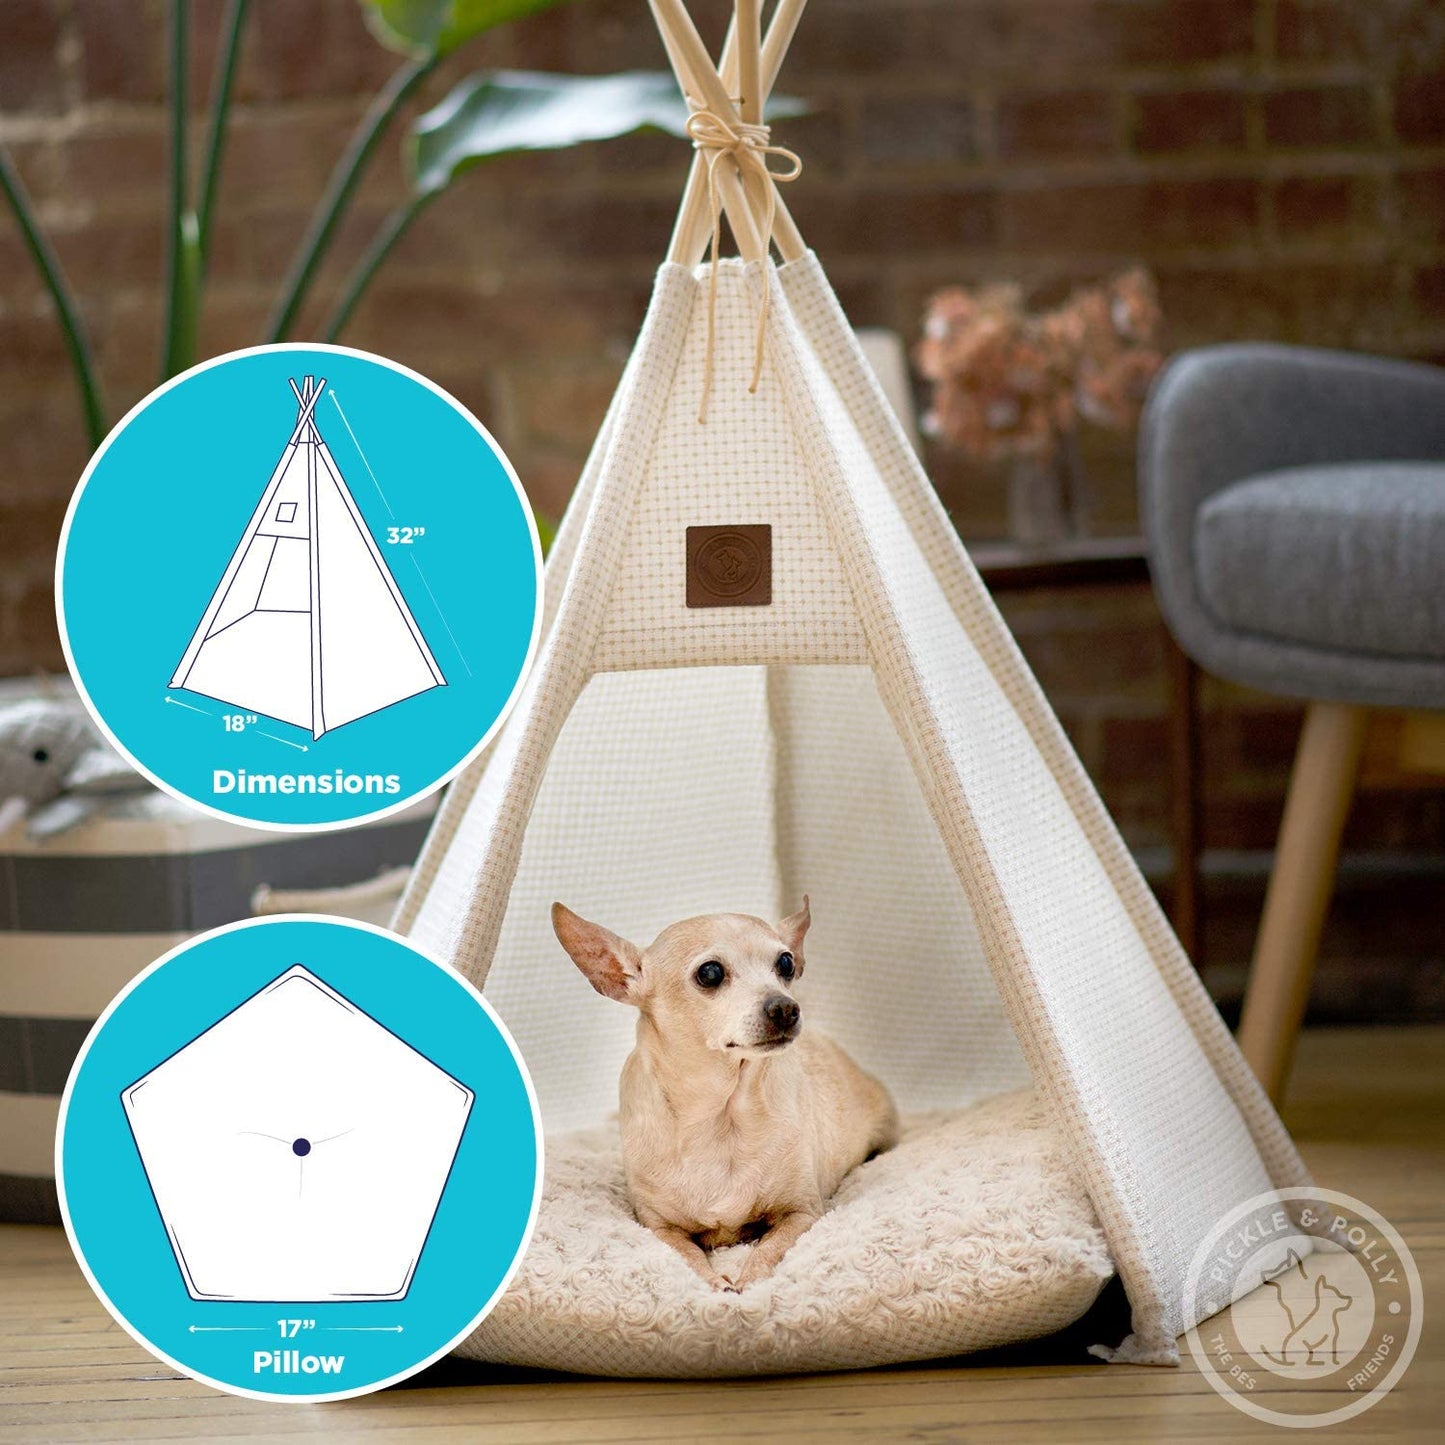 - Small to Medium Dog Teepee/Tent for Cats - Stylish, Soft, Cozy Bed W/Thick Plush Pad, Durable Fabric & Machine Washable (White)